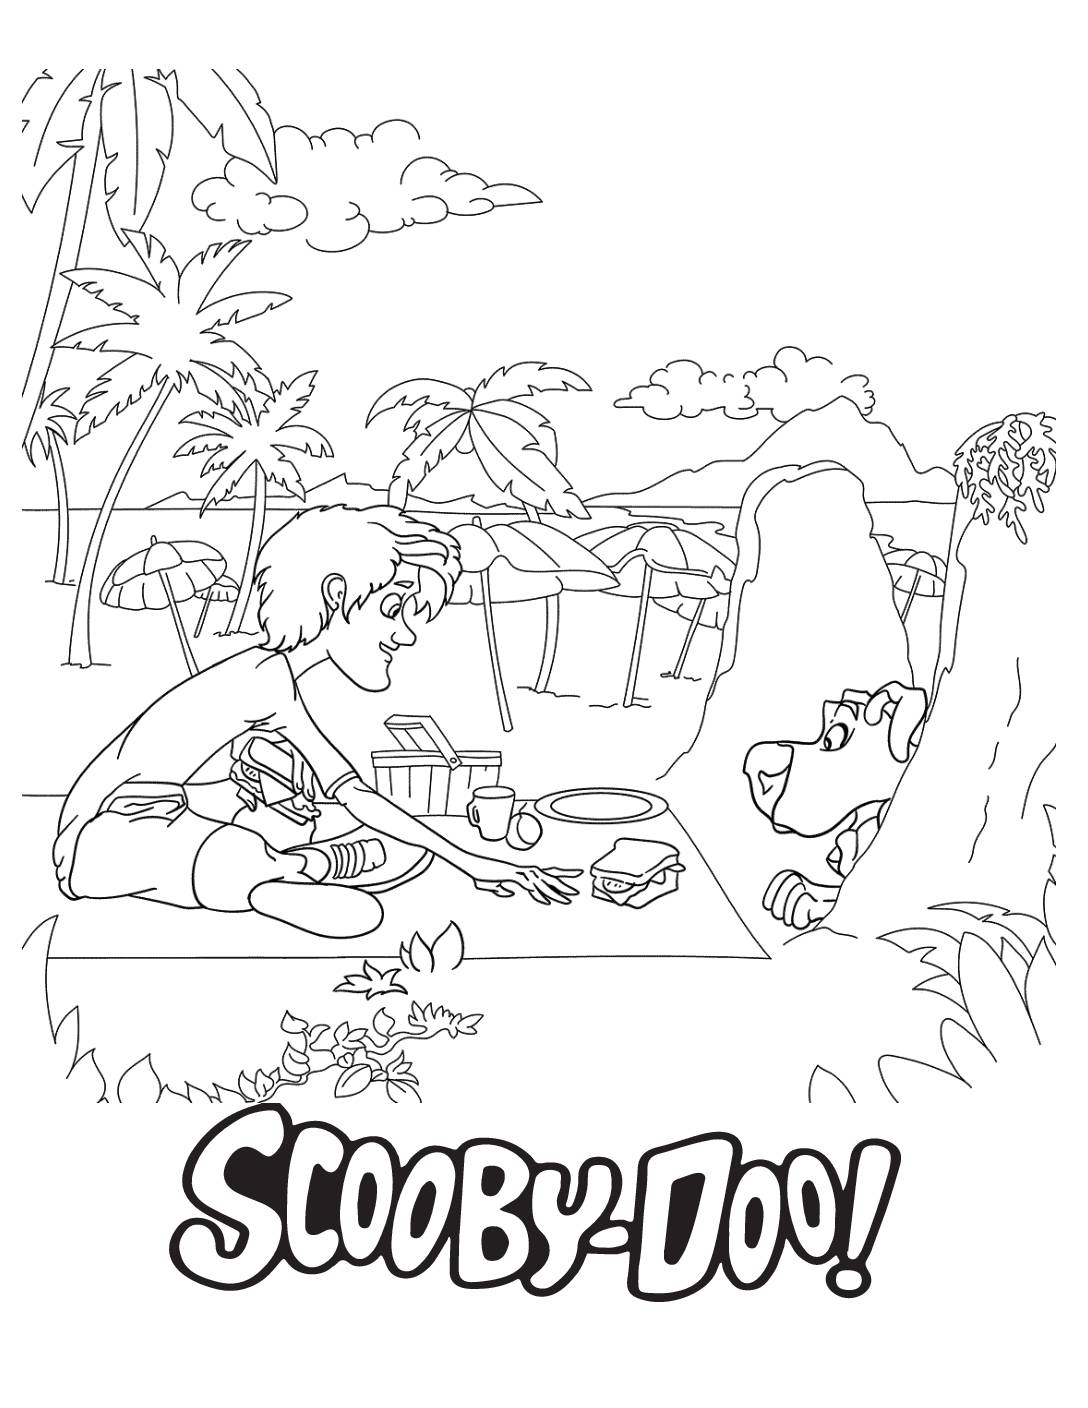 Coloring Page 7 Scooby Doo Coloring Pages